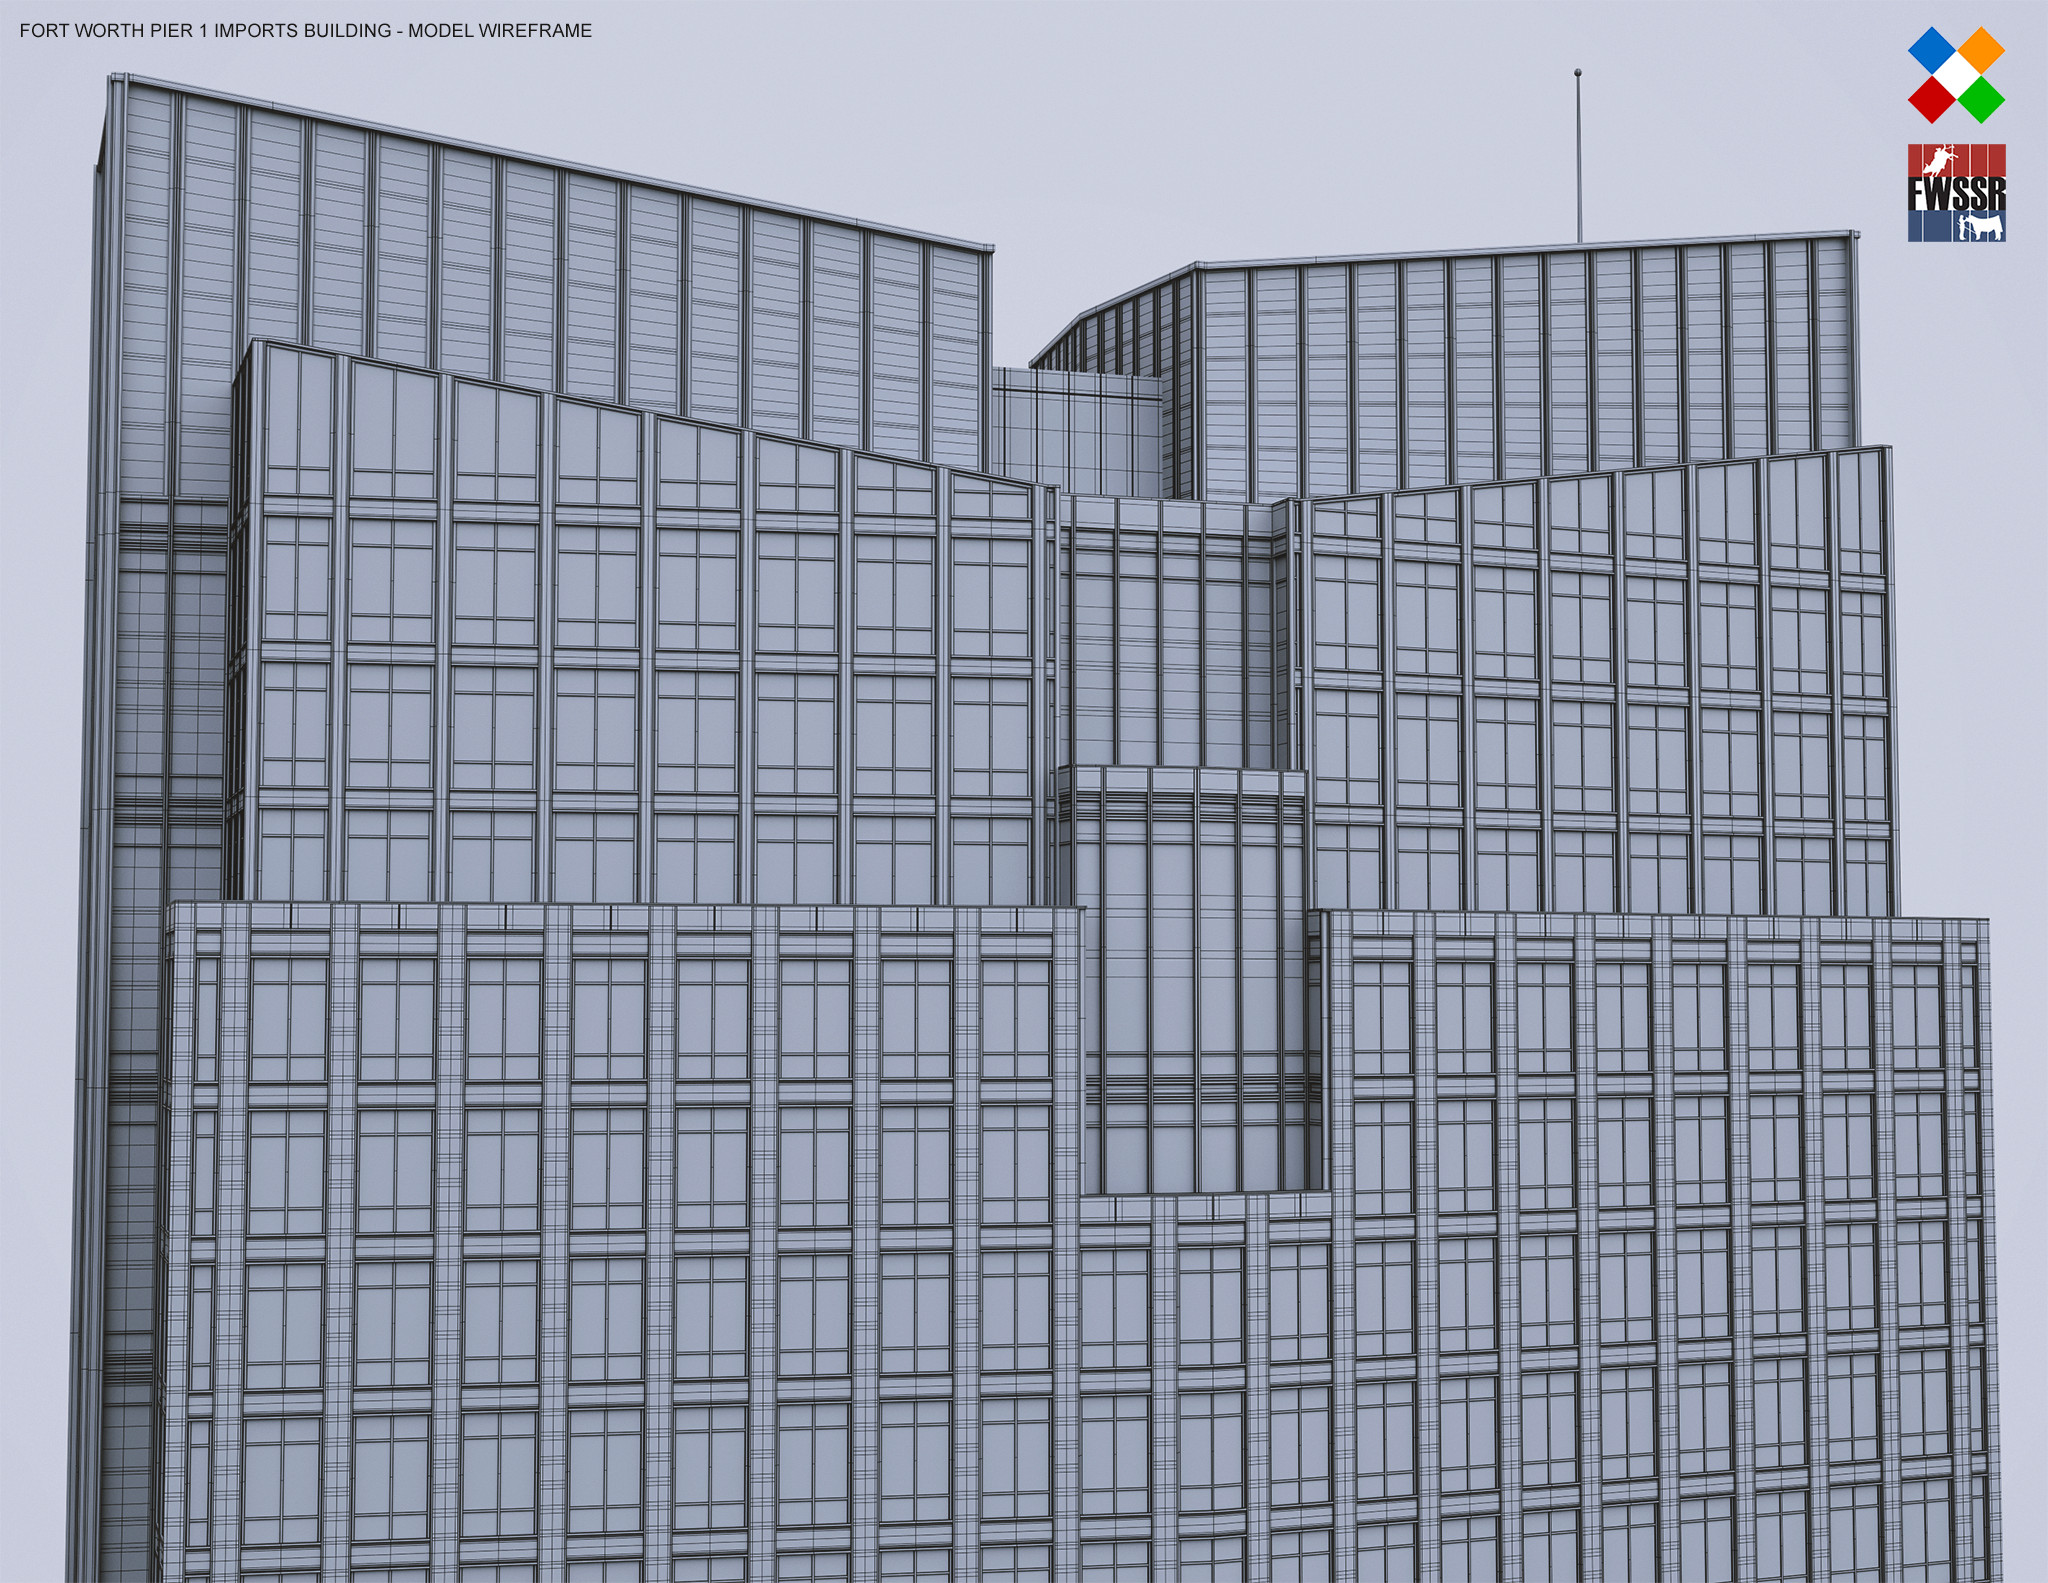 Fort Worth Pier 1 Imports Building Wireframe Render